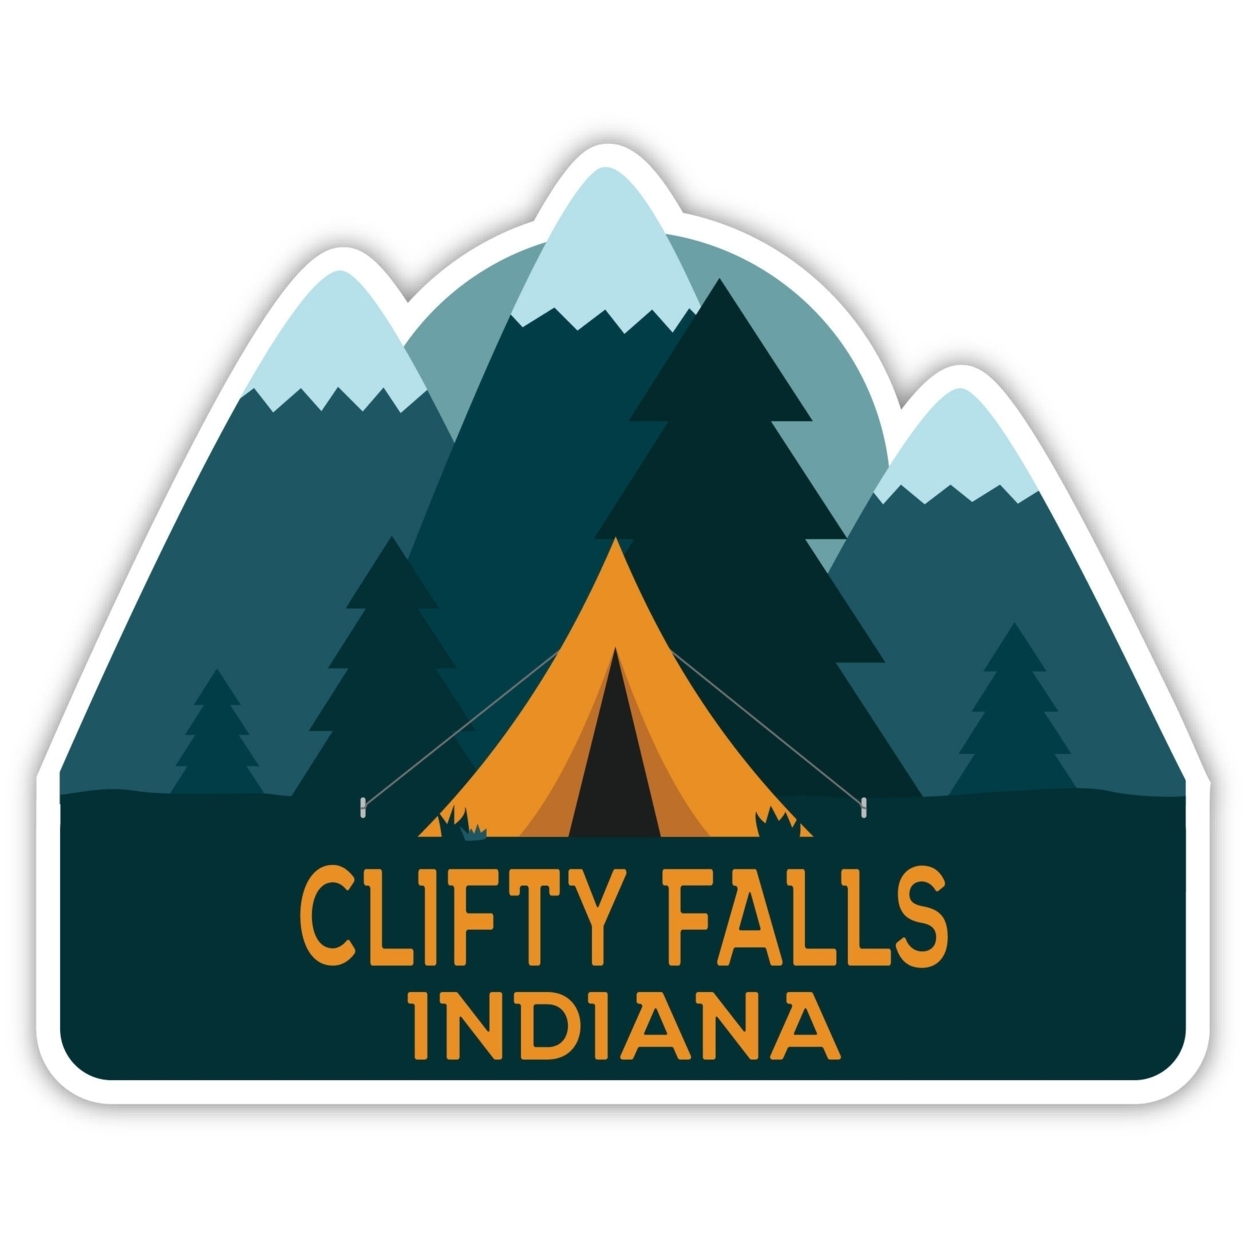 Clifty Falls Indiana Souvenir Decorative Stickers (Choose Theme And Size) - 4-Pack, 10-Inch, Tent